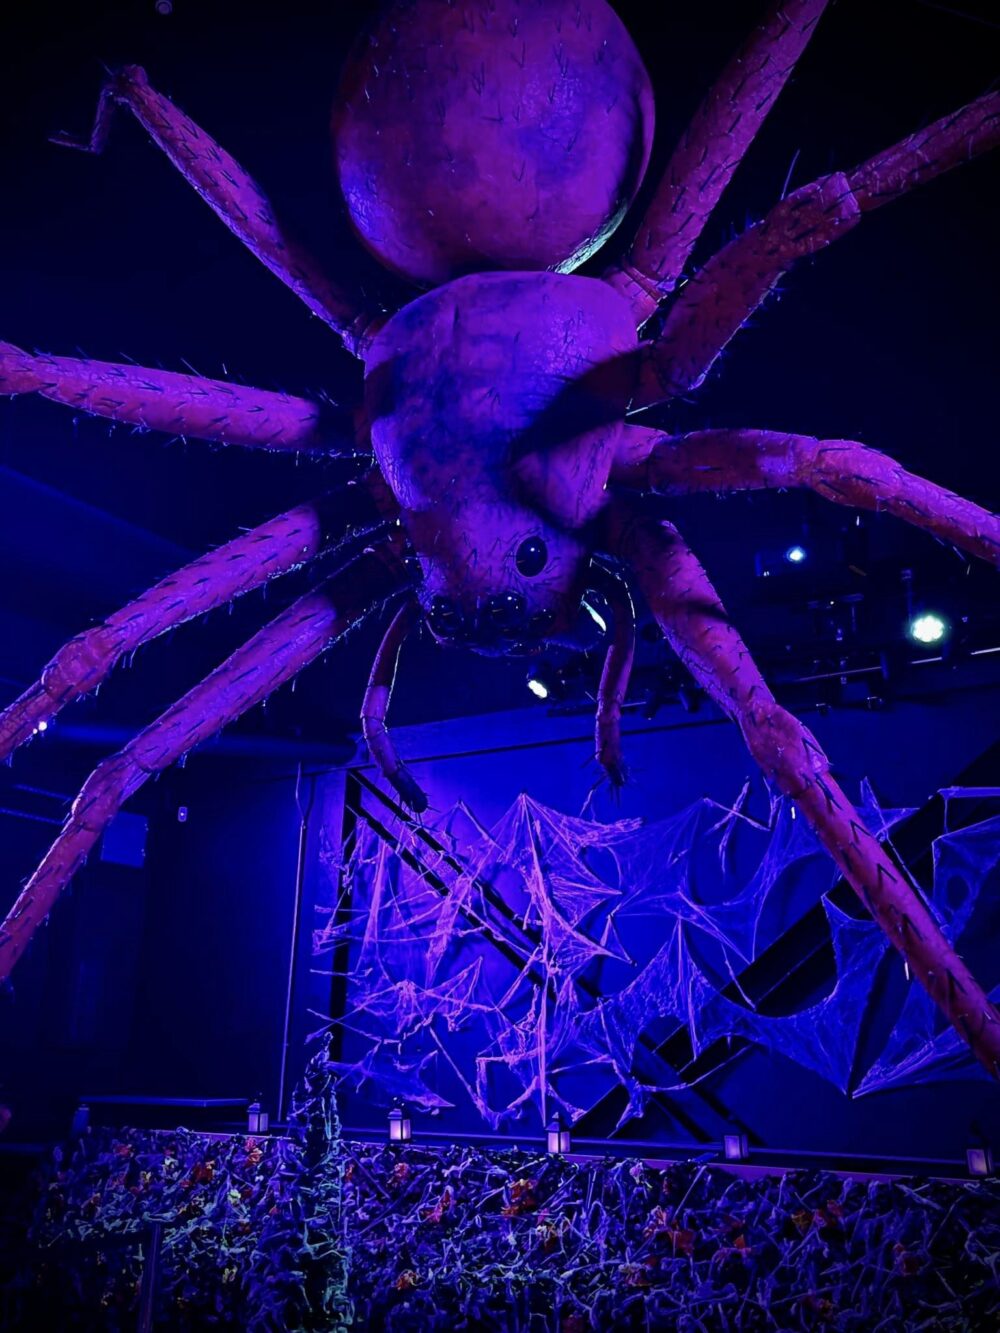 Sally the Spider installation at Eureka! Science + Discovery until Nov 5th.  Image credit: Eureka!